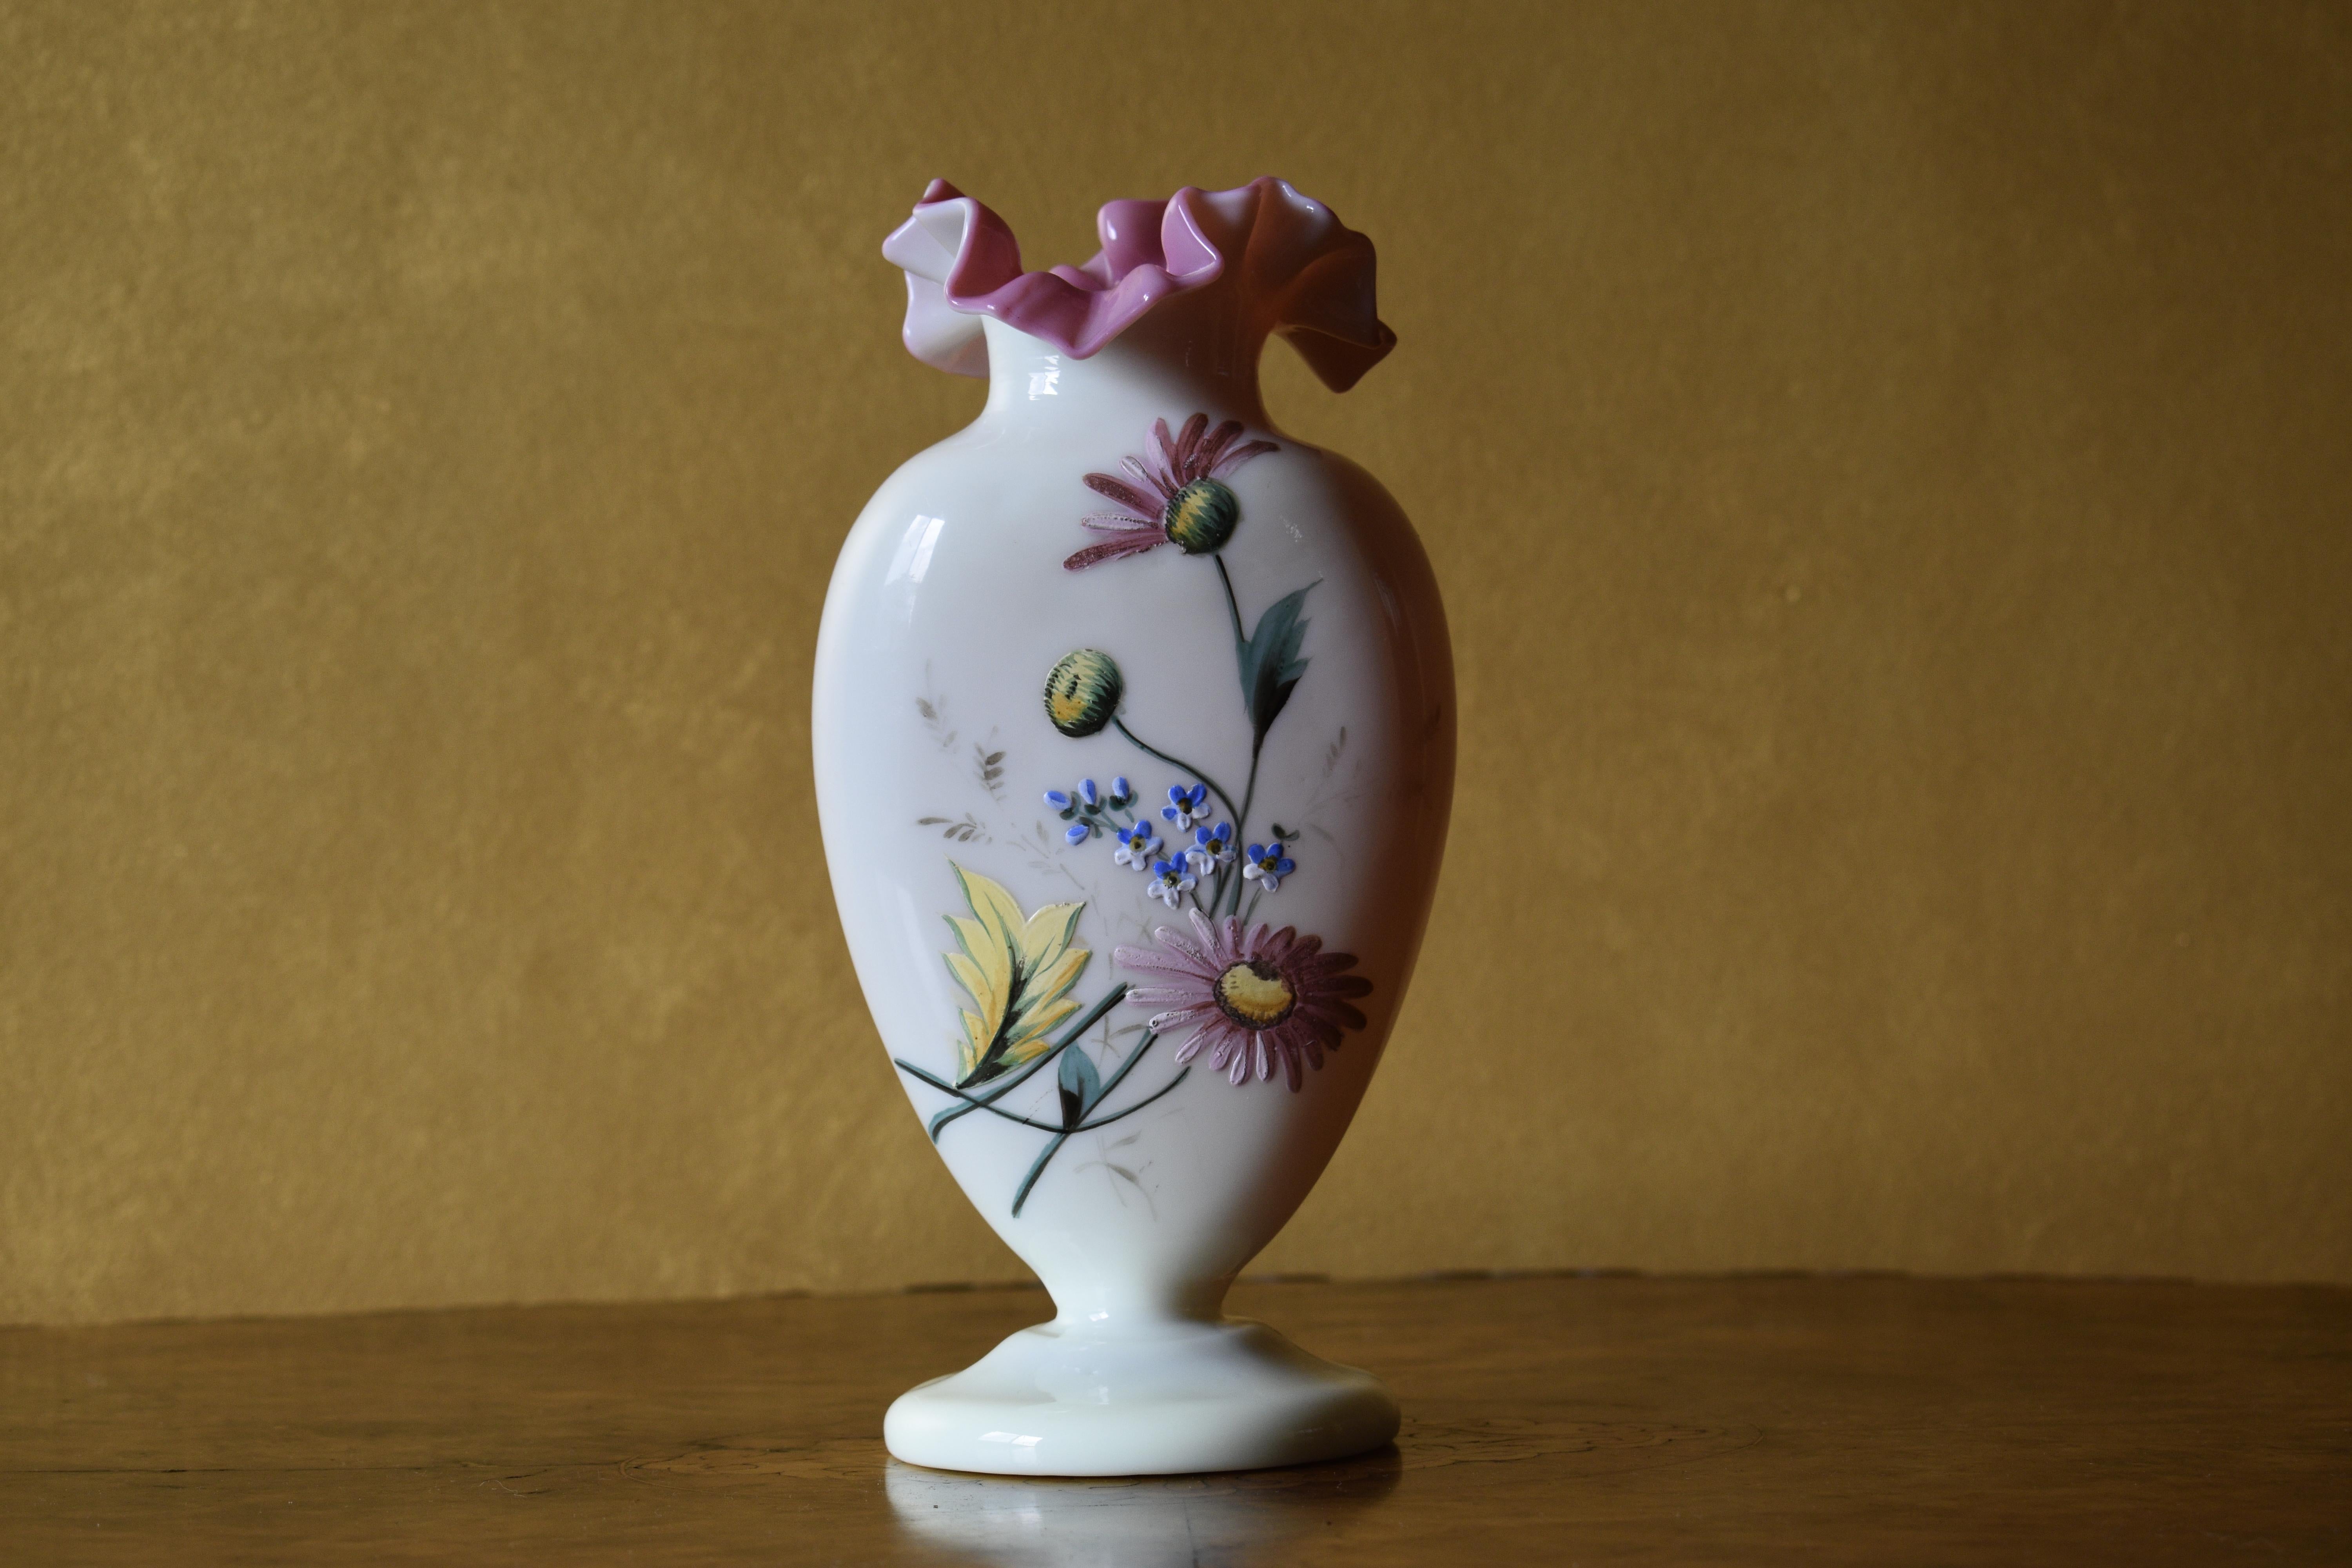 Glass vase with hand panted floral decorations and pink frilled rim

Circa:1880

Material: Glass

Measurements: 12 cm high, base 9.5cm

Postage via Australia Post and tracking. 